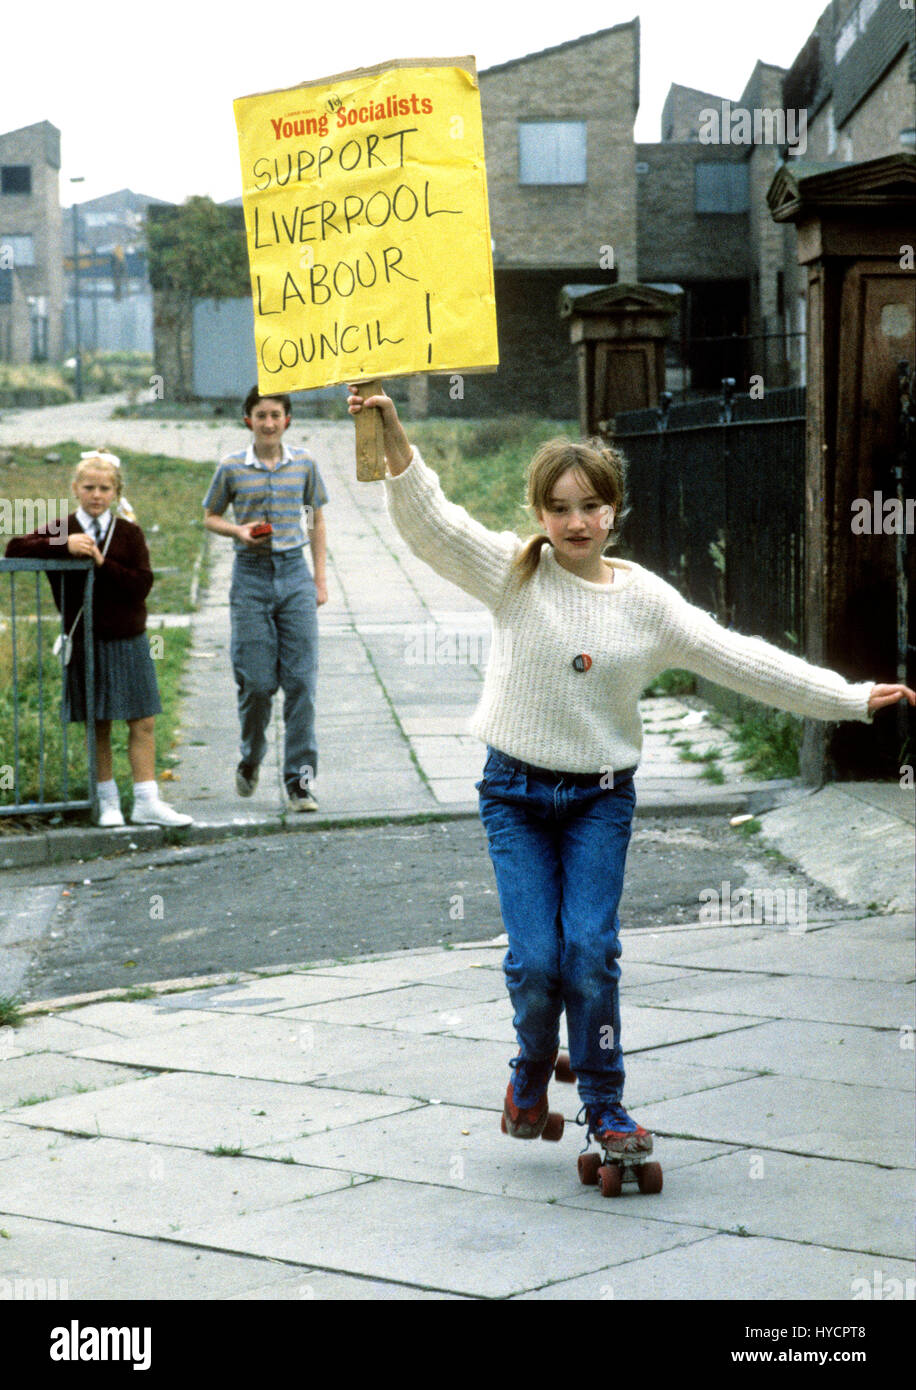 Young socialist waving banner supporting the Militant led Liverpool Council in 1985 Stock Photo